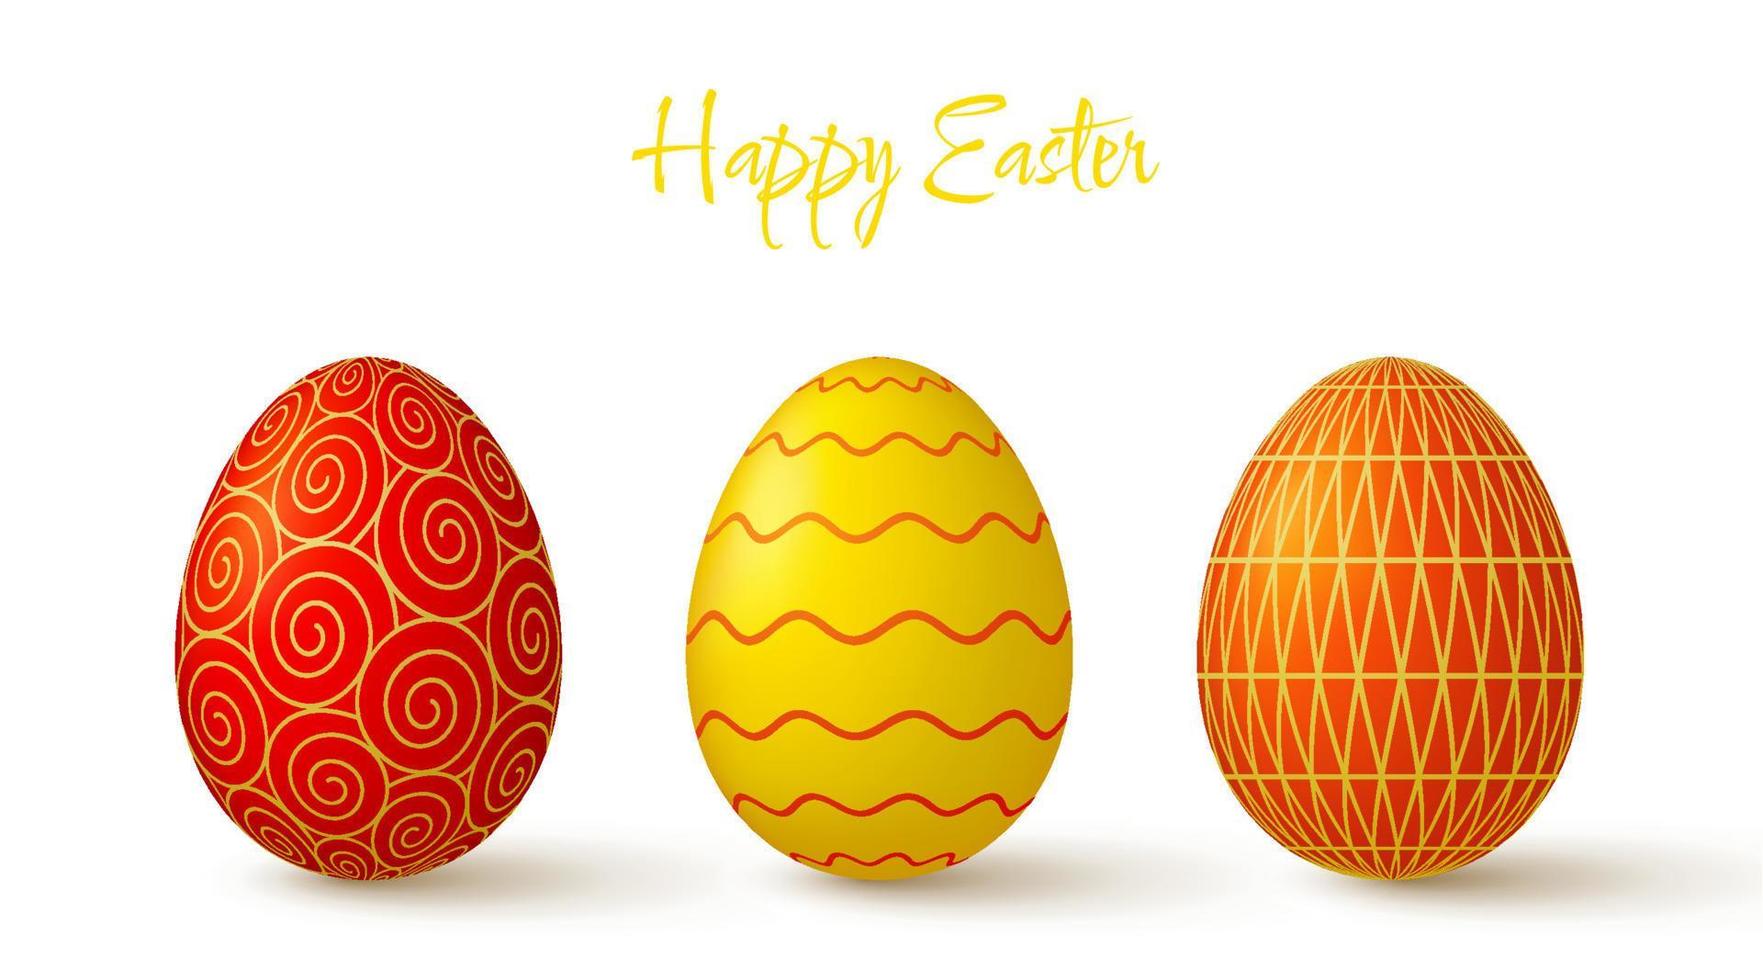 Easter eggs collection. Cute 3D design elements in bright colors with a pattern. vector